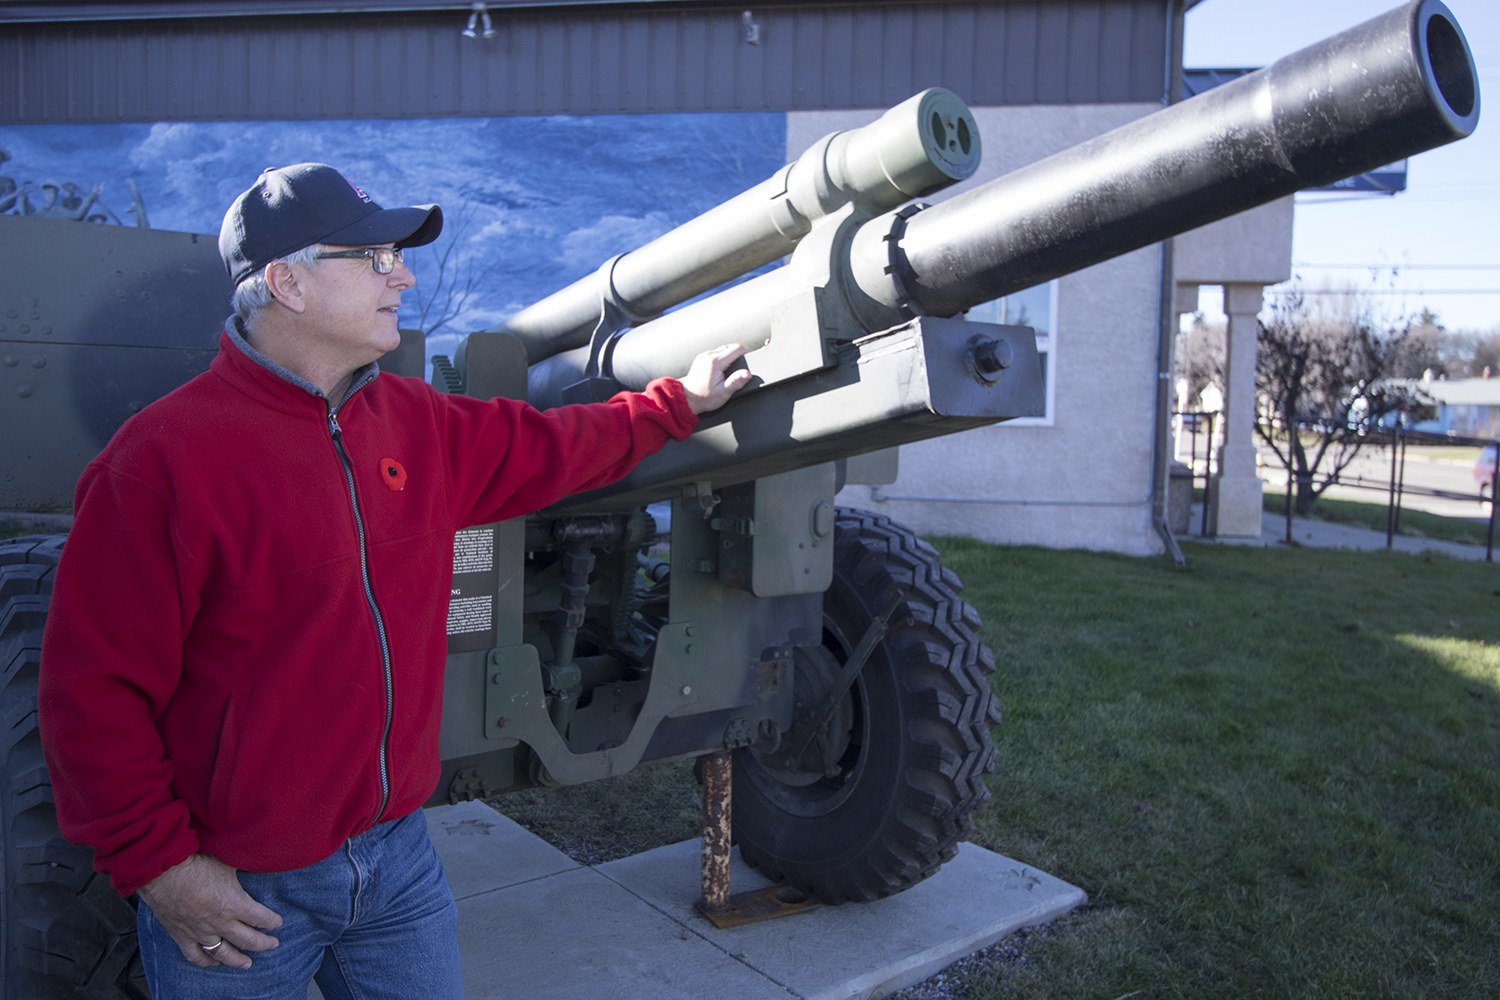 PROUD MOMENT - Arnie MacAskill has worked for nearly six years to bring this C1 105mm Howizter gun to stand as a memorial monument in front of the Royal Canadian Legion